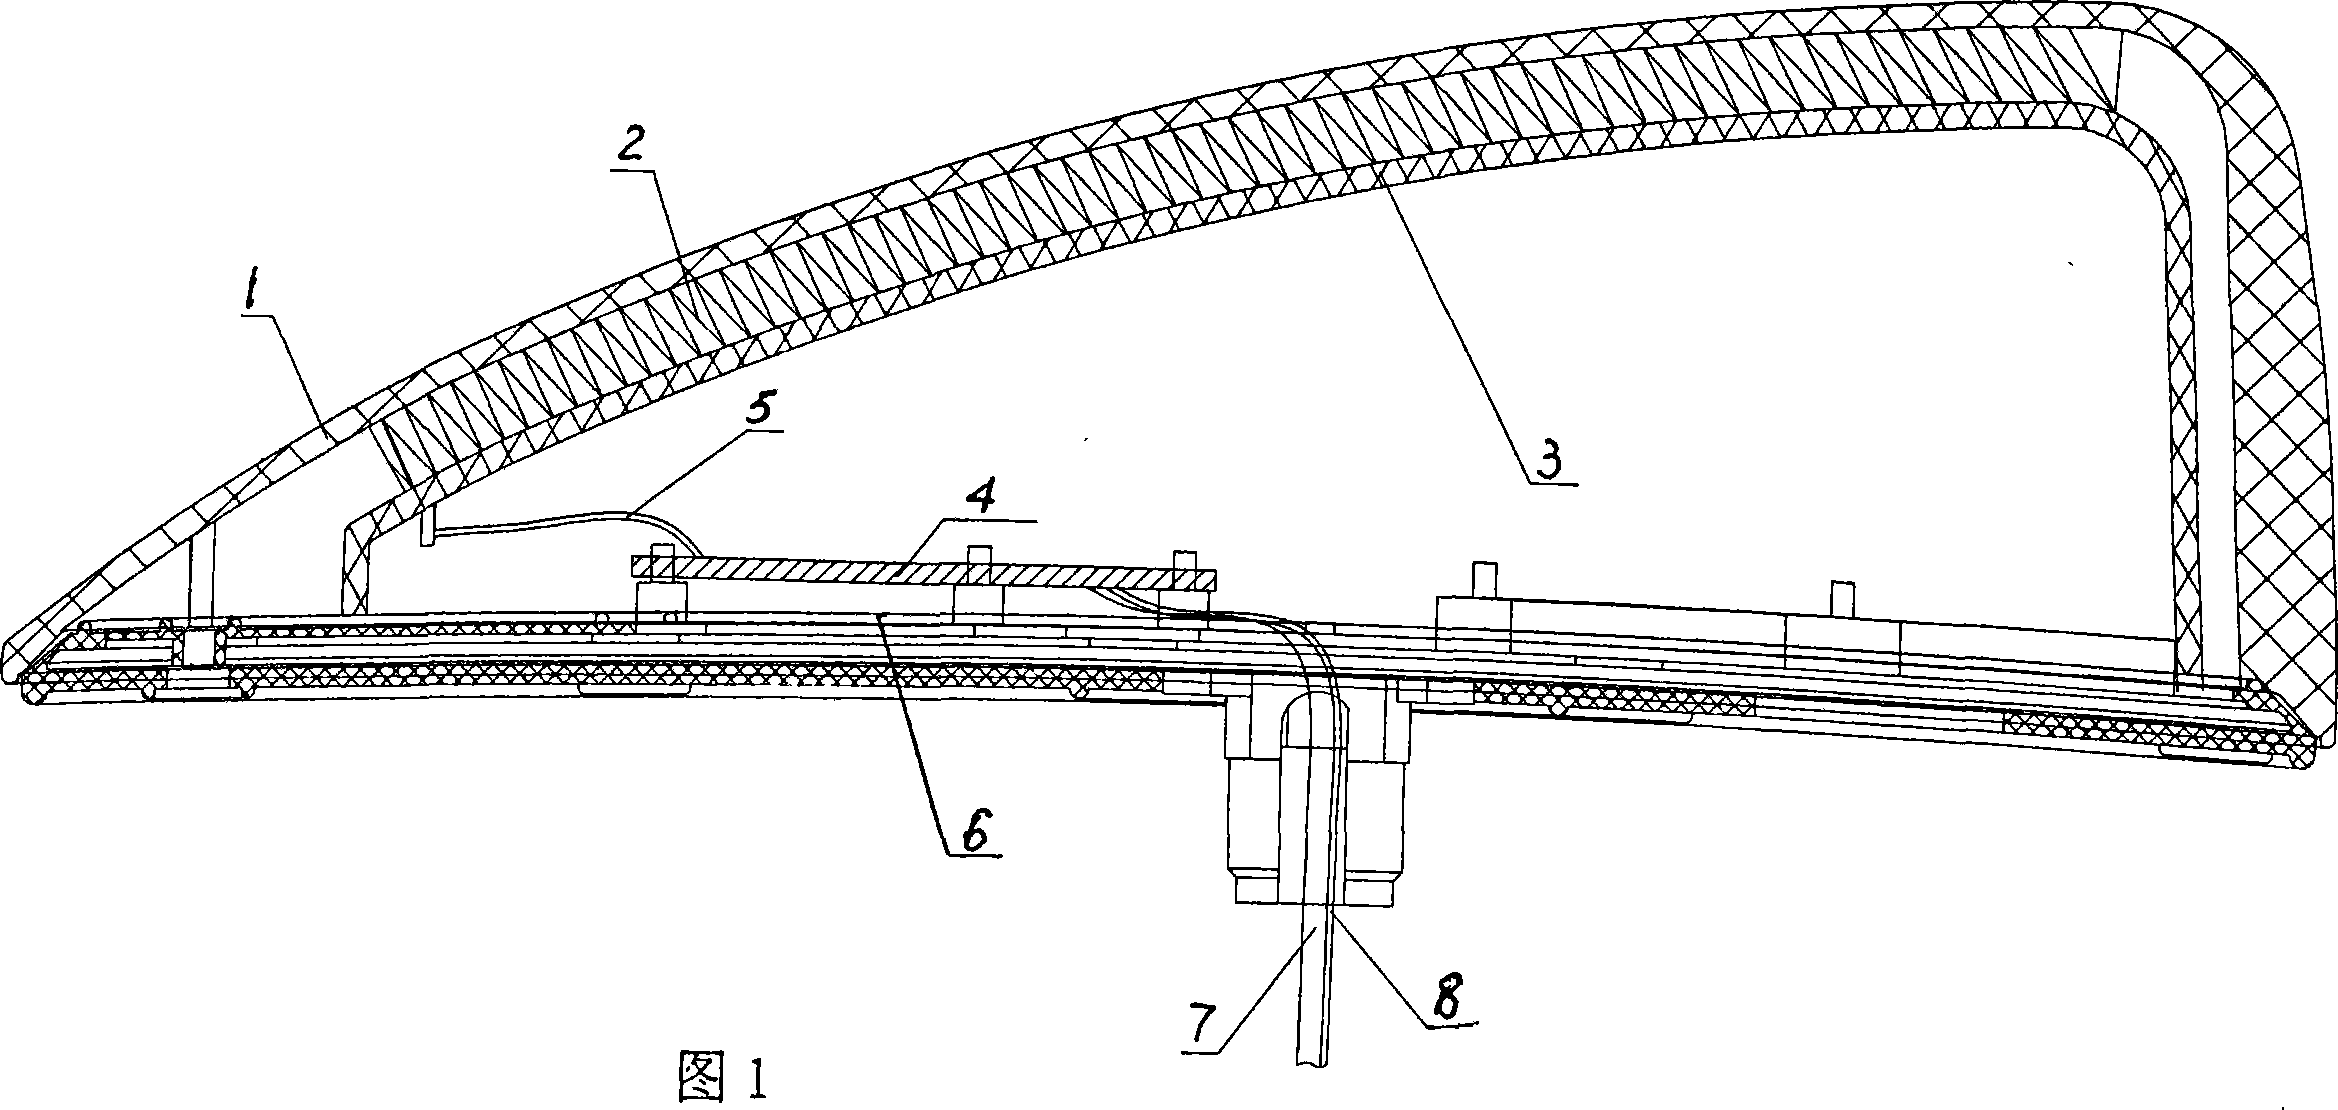 An upper laid aerial device of automobile